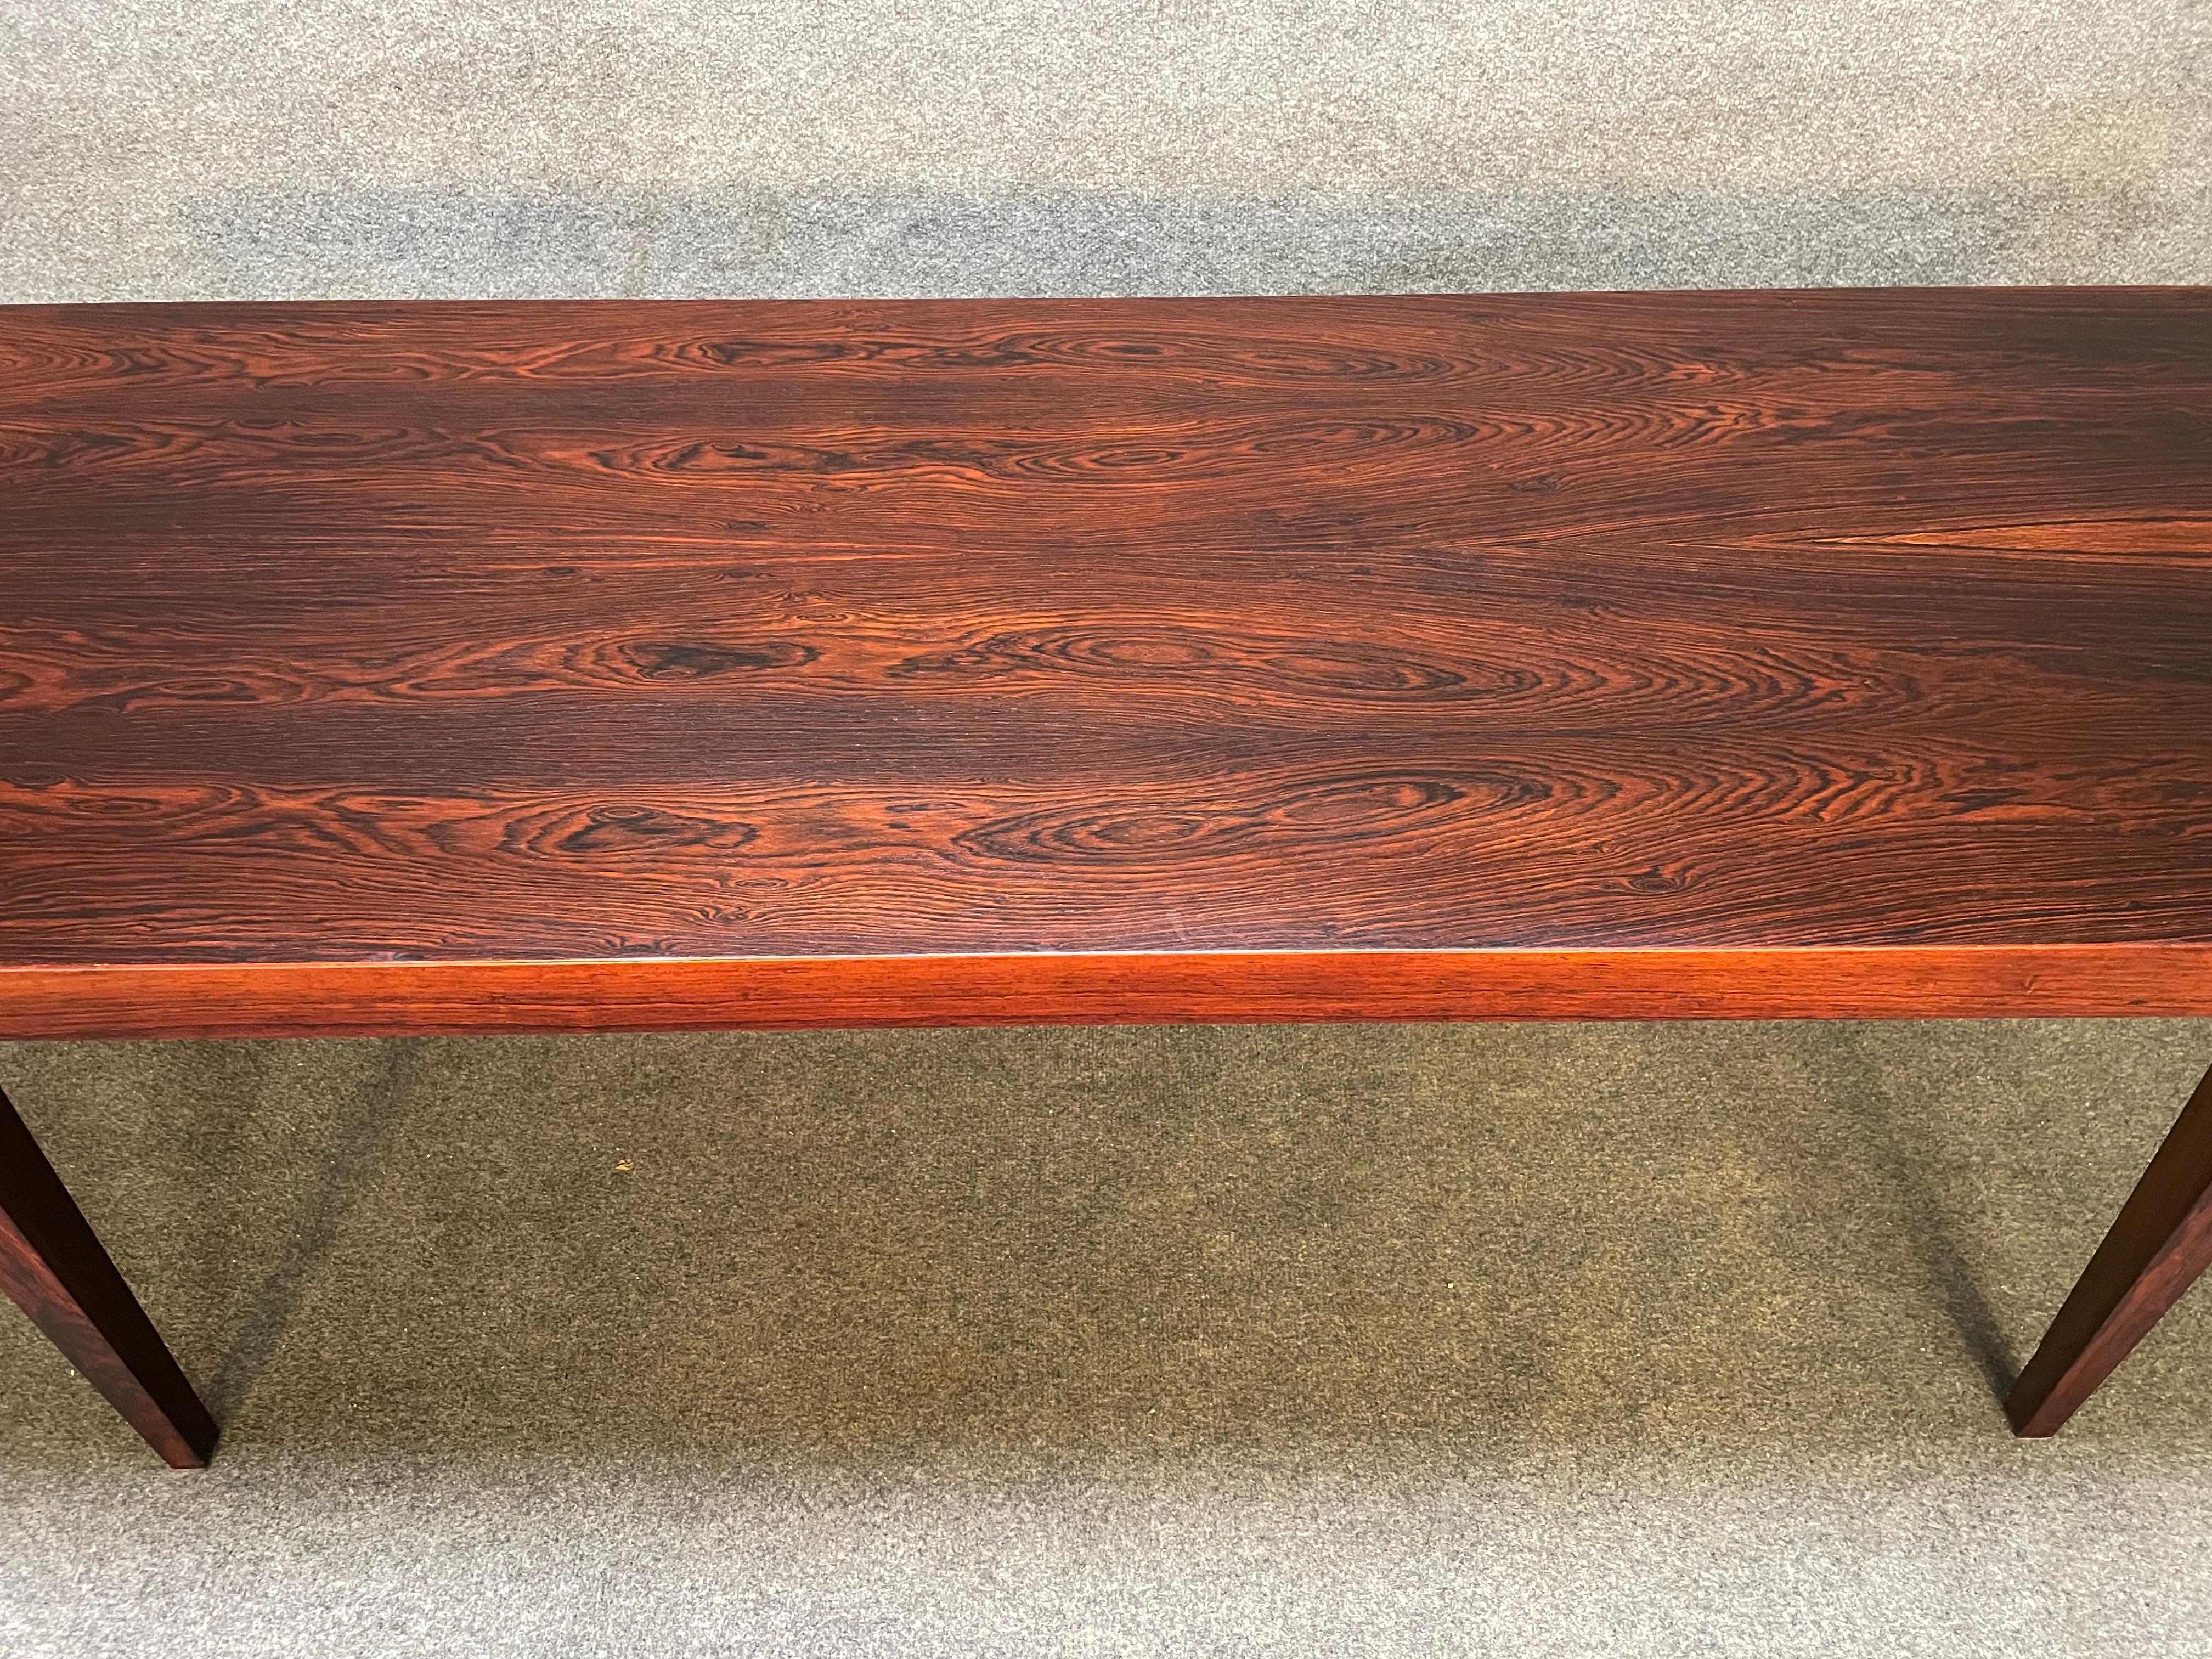 Vintage Danish Mid Century Modern Rosewood Coffee Table by Severin Hansen For Sale 4